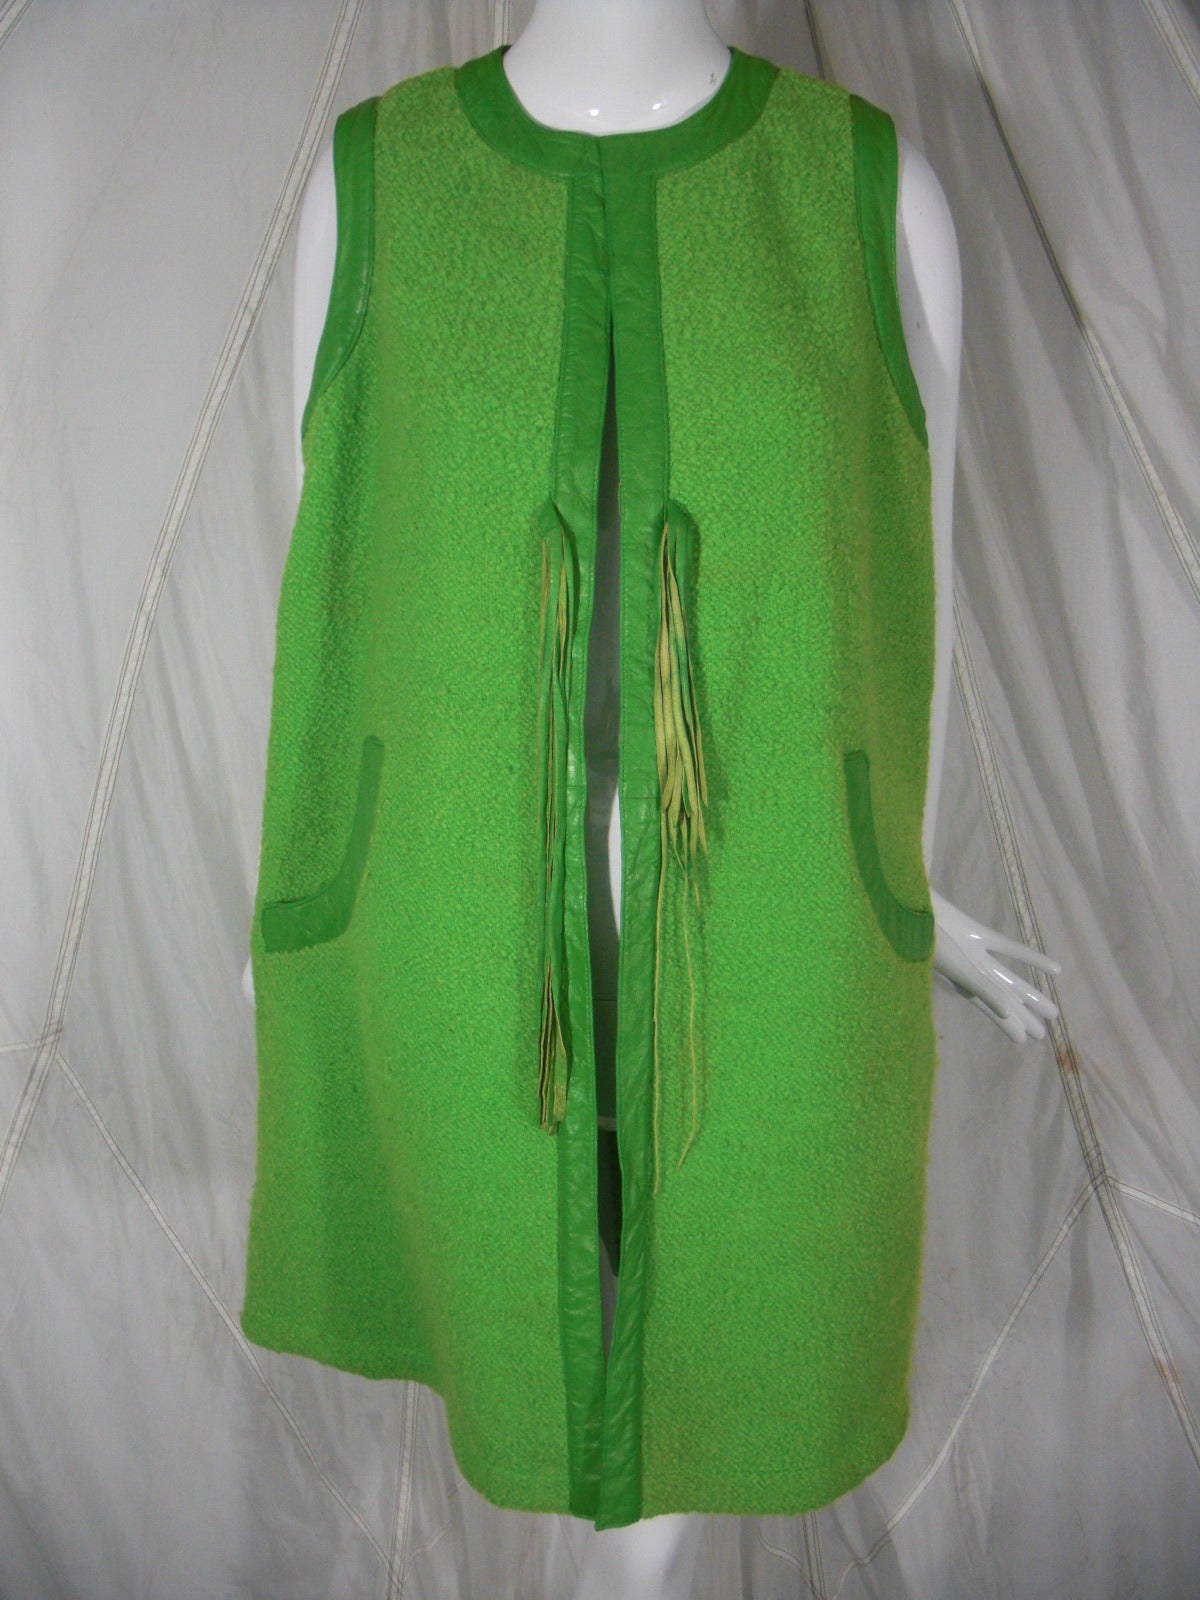 Women's 1960s Bonnie Cashin Apple Green Wool and Leather Trimmed Vest